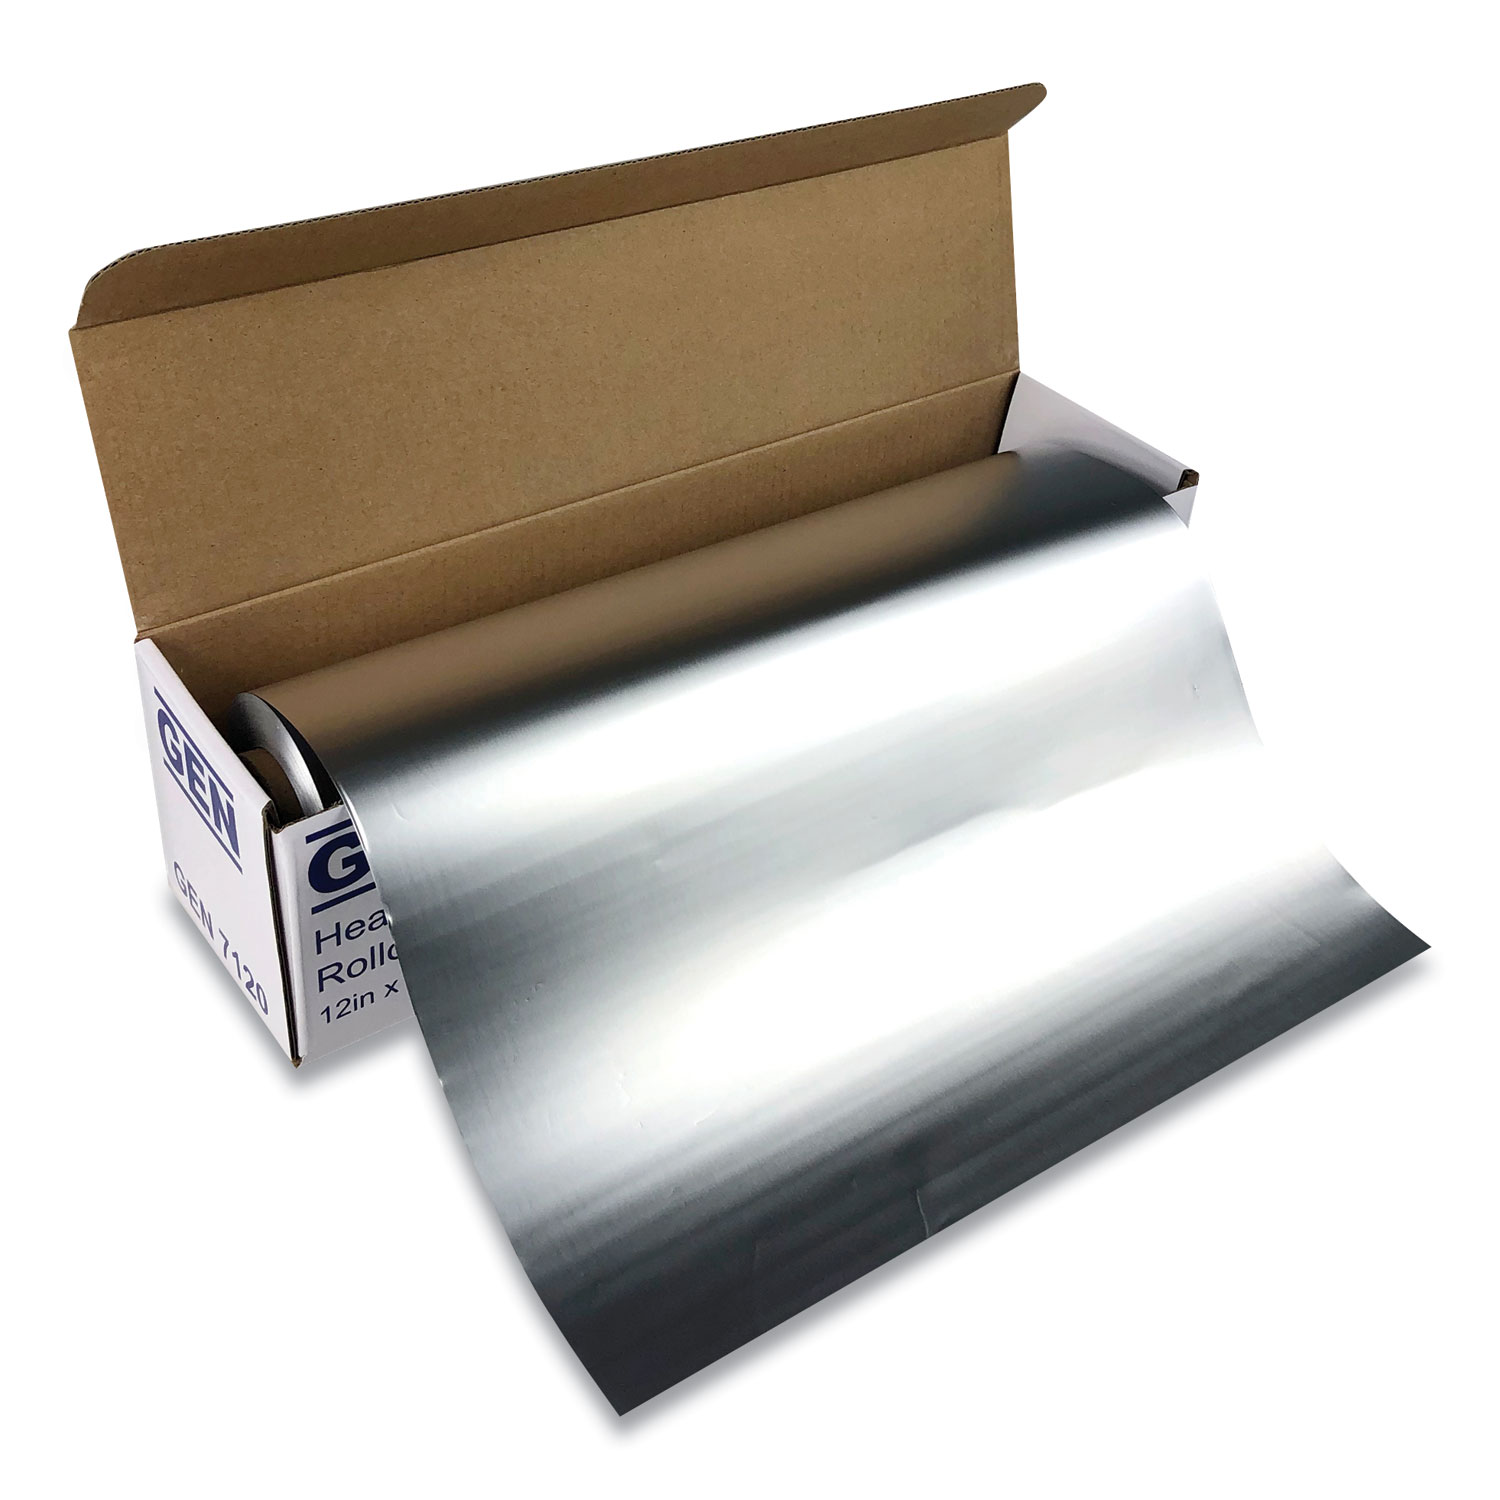 Differences Between Heavy Duty Aluminum Foil and Regular